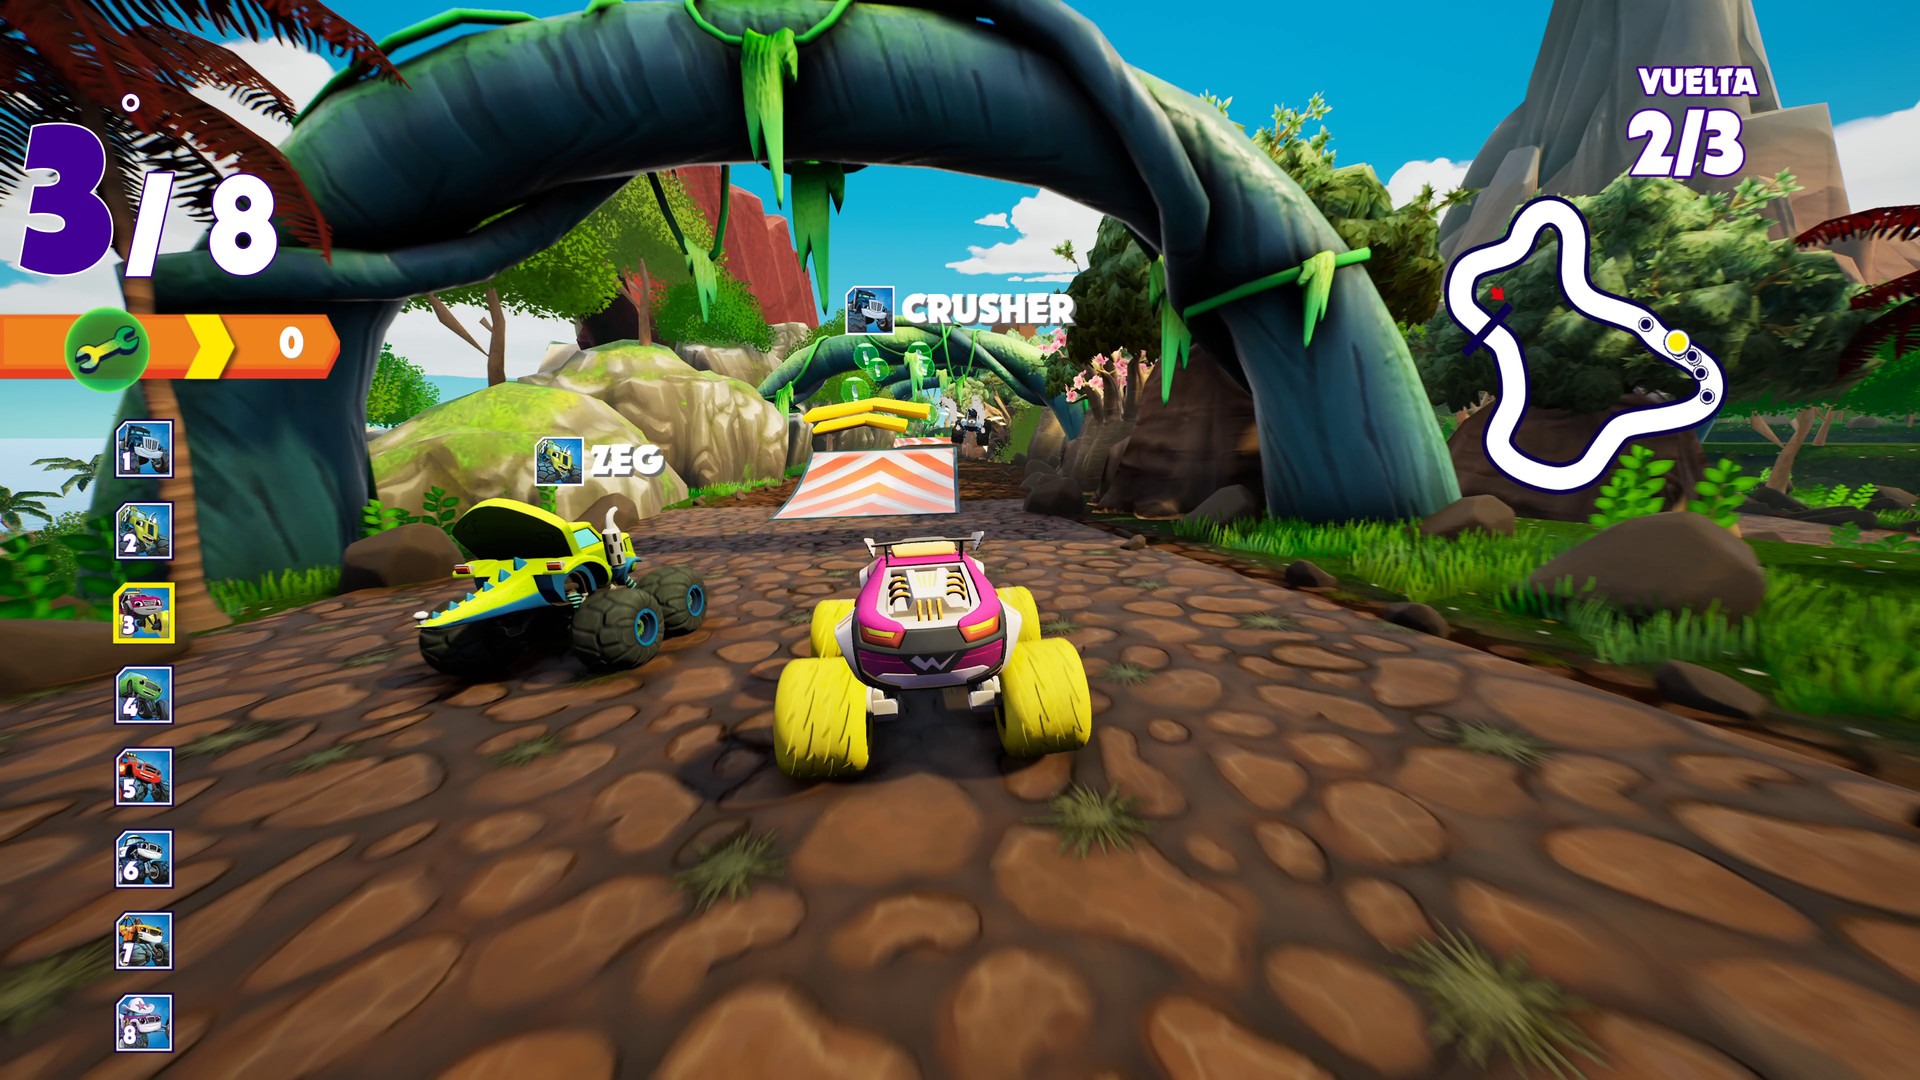 Buy Blaze and the Monster Machines: Axle City Racers